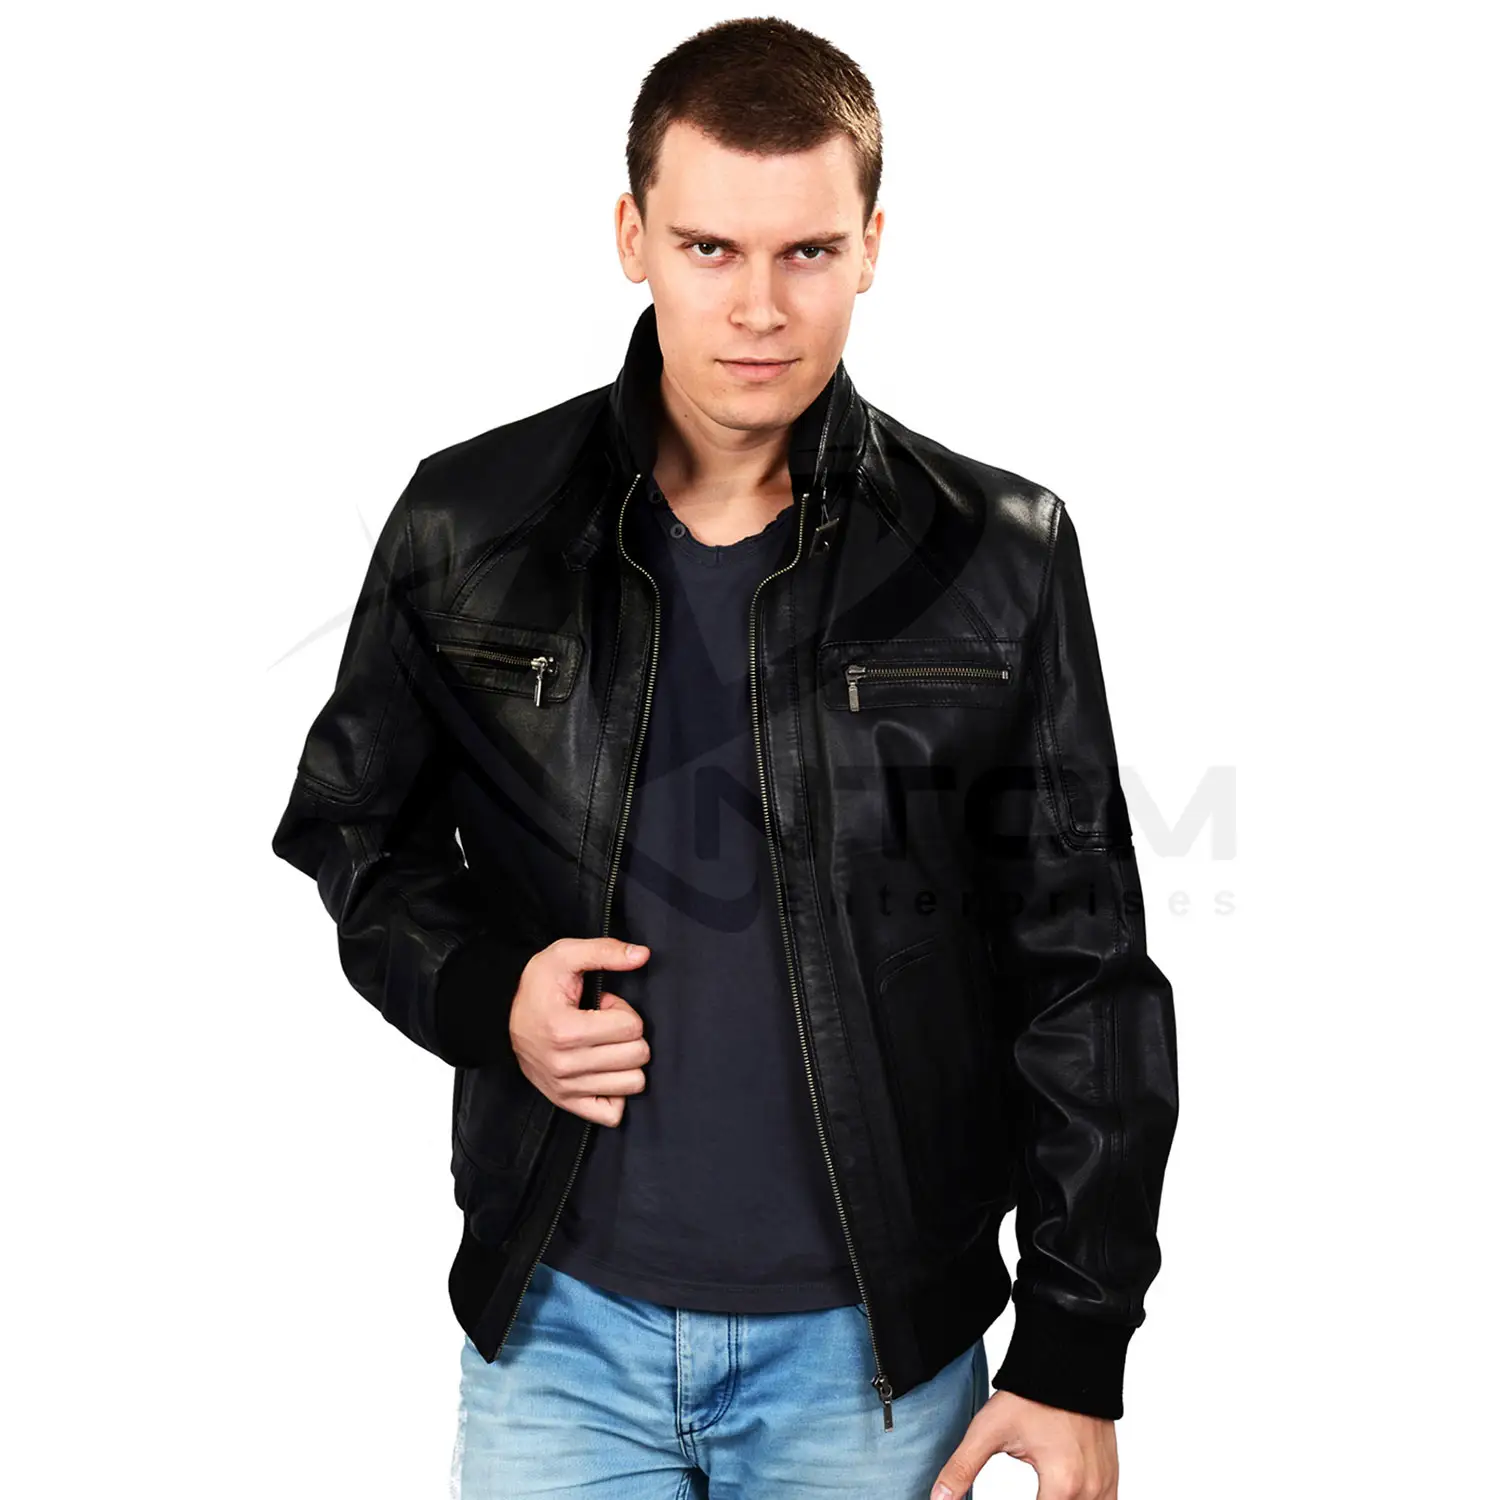 Leather Men's Korean fashion slim and handsome suit leather coat men's flying suit spring and autumn motorcycle leather jacket